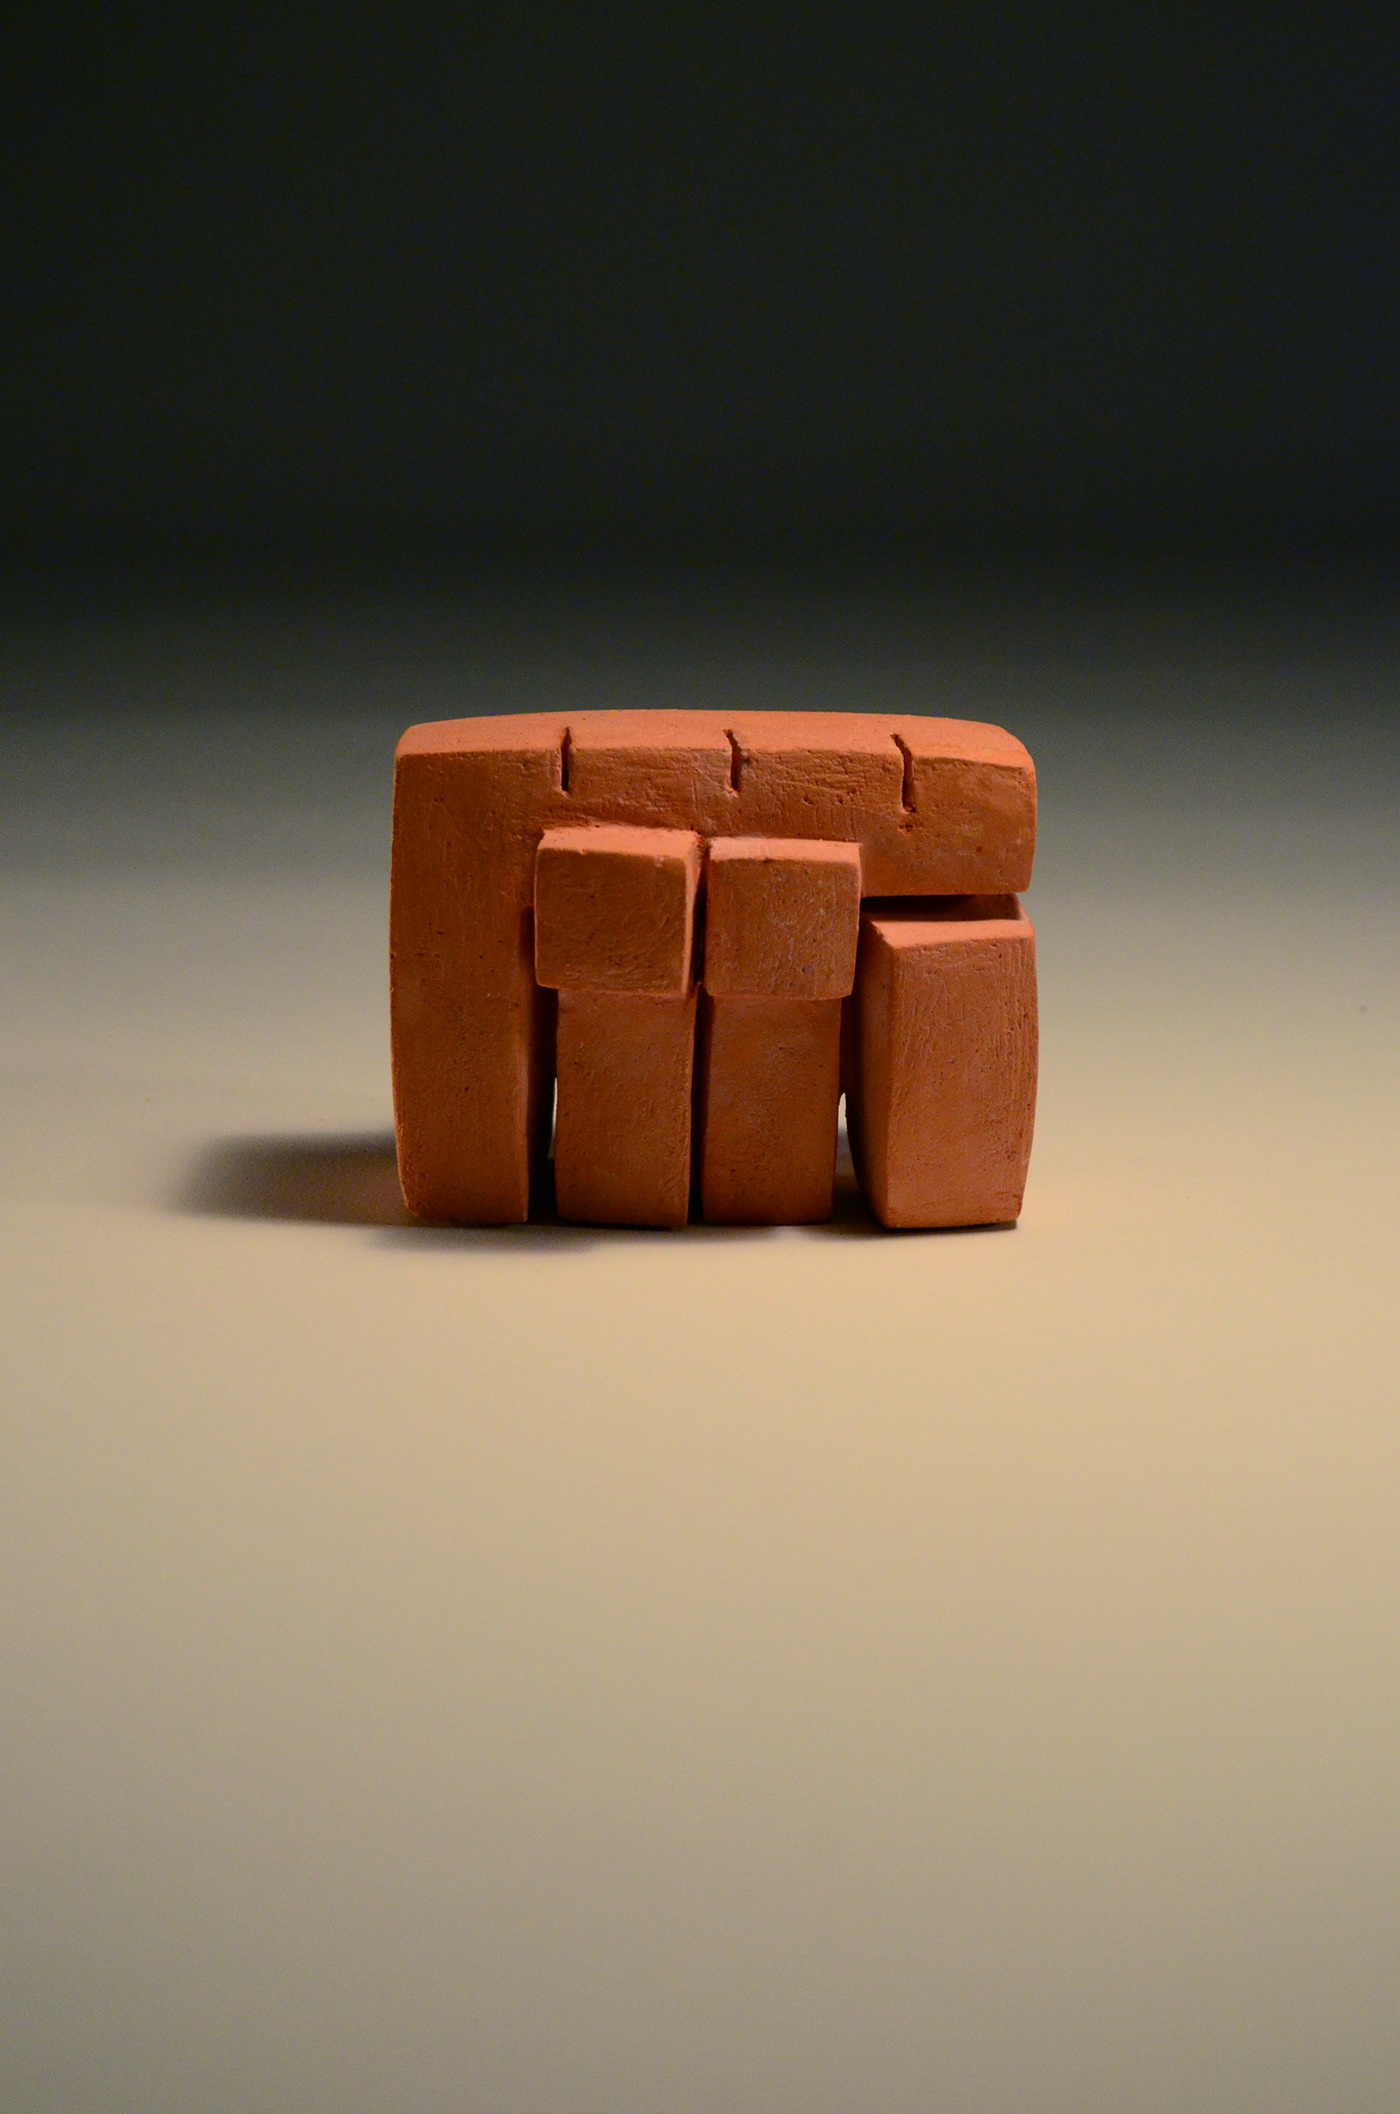 abstract fine art sculpture geometry architecture art terracotta fortification